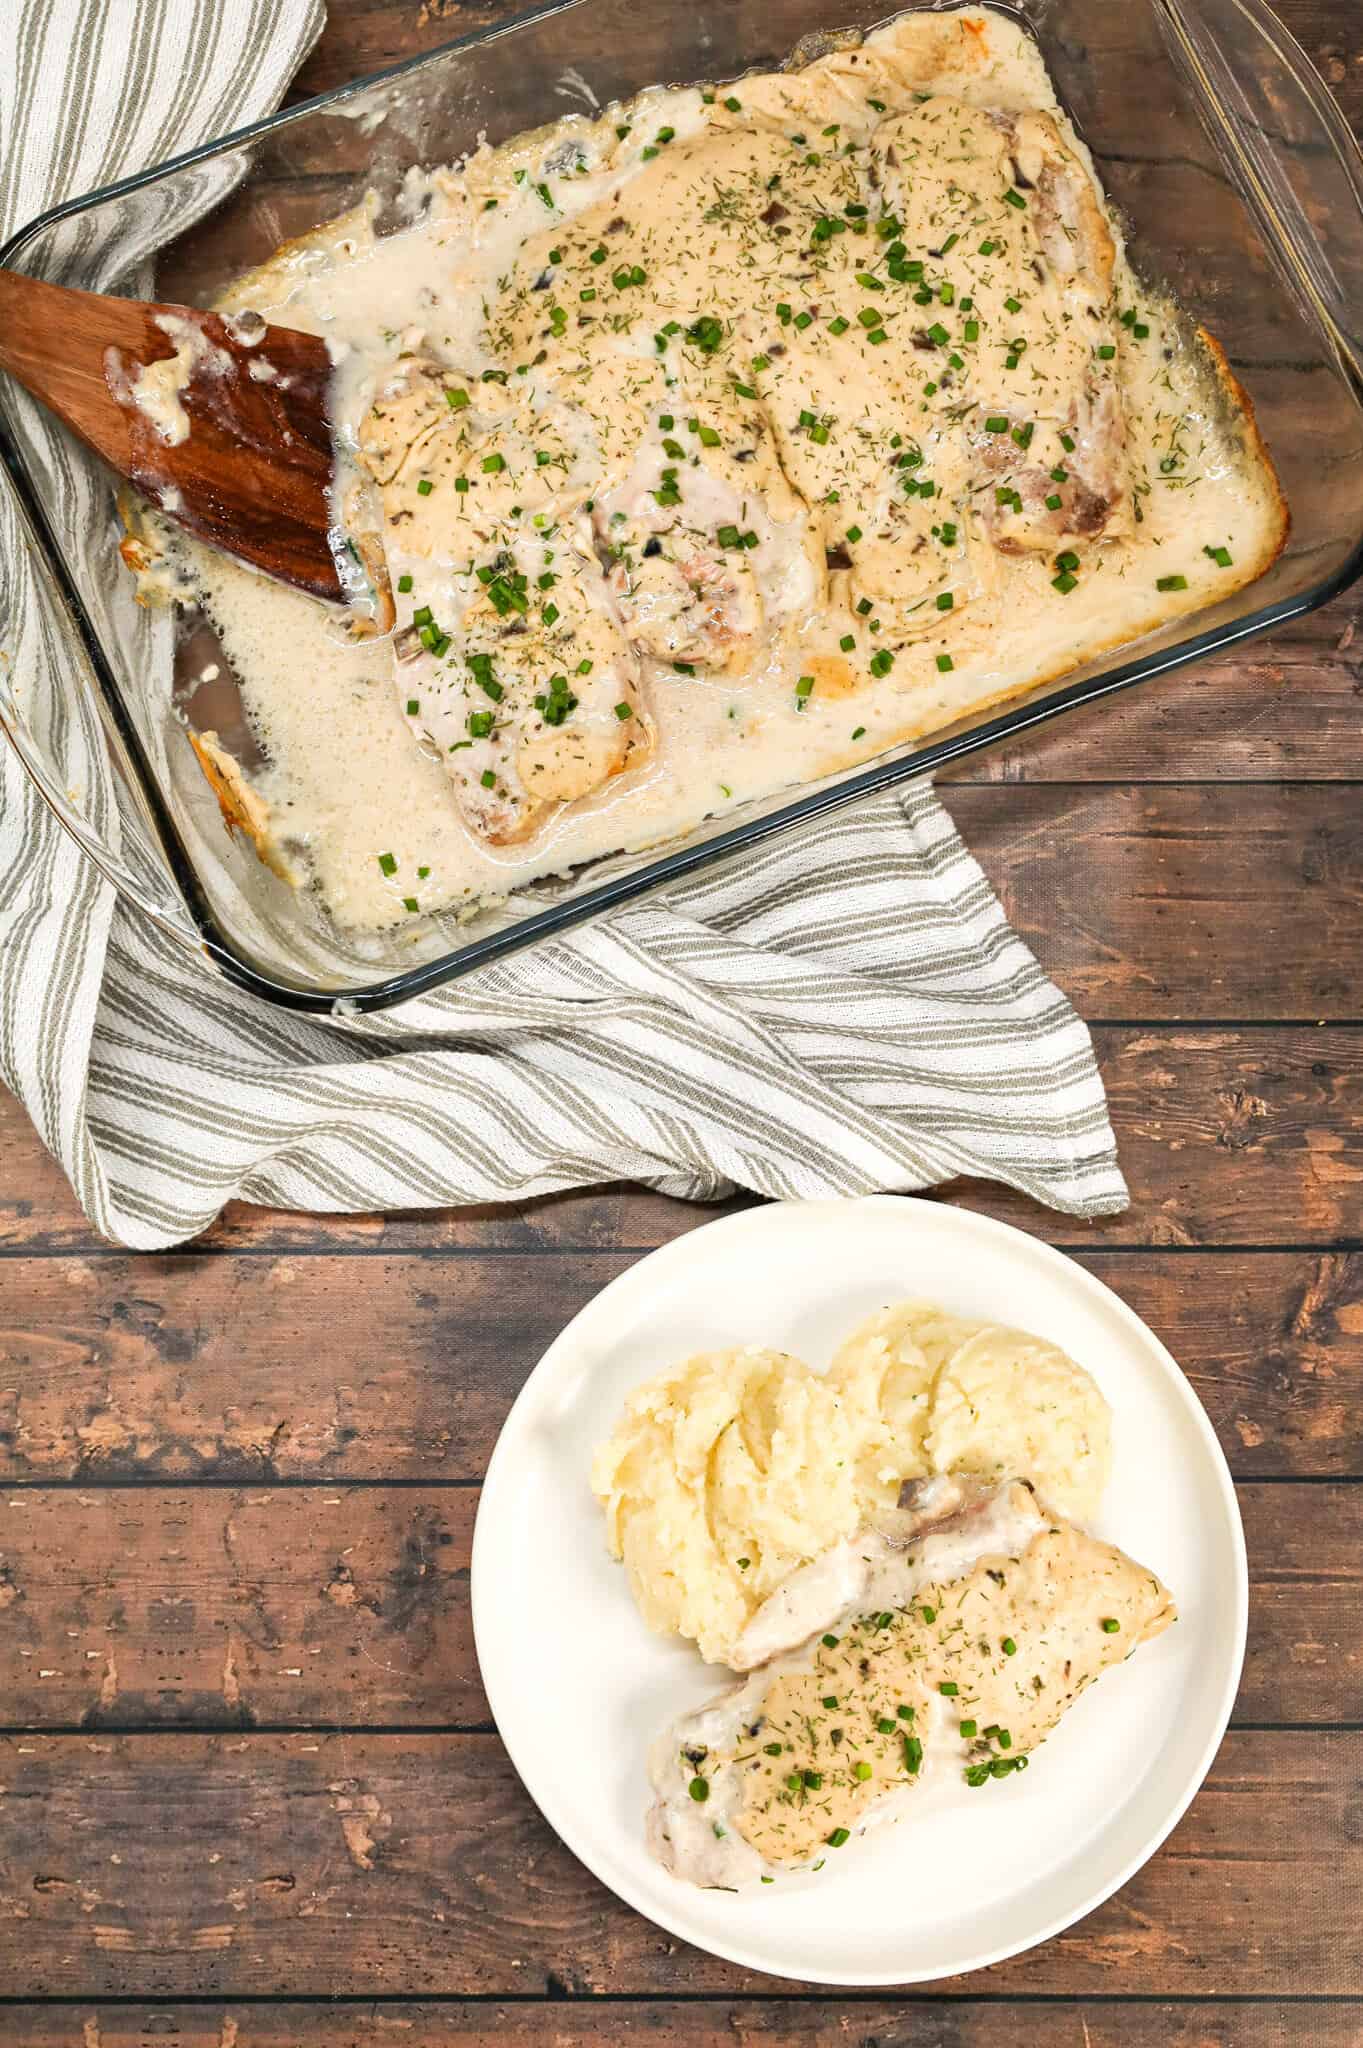 Ranch Pork Chops are an easy dinner recipe using boneless pork chops cooked in a creamy mixture of sour cream, cream of mushroom soup and ranch dressing mix.